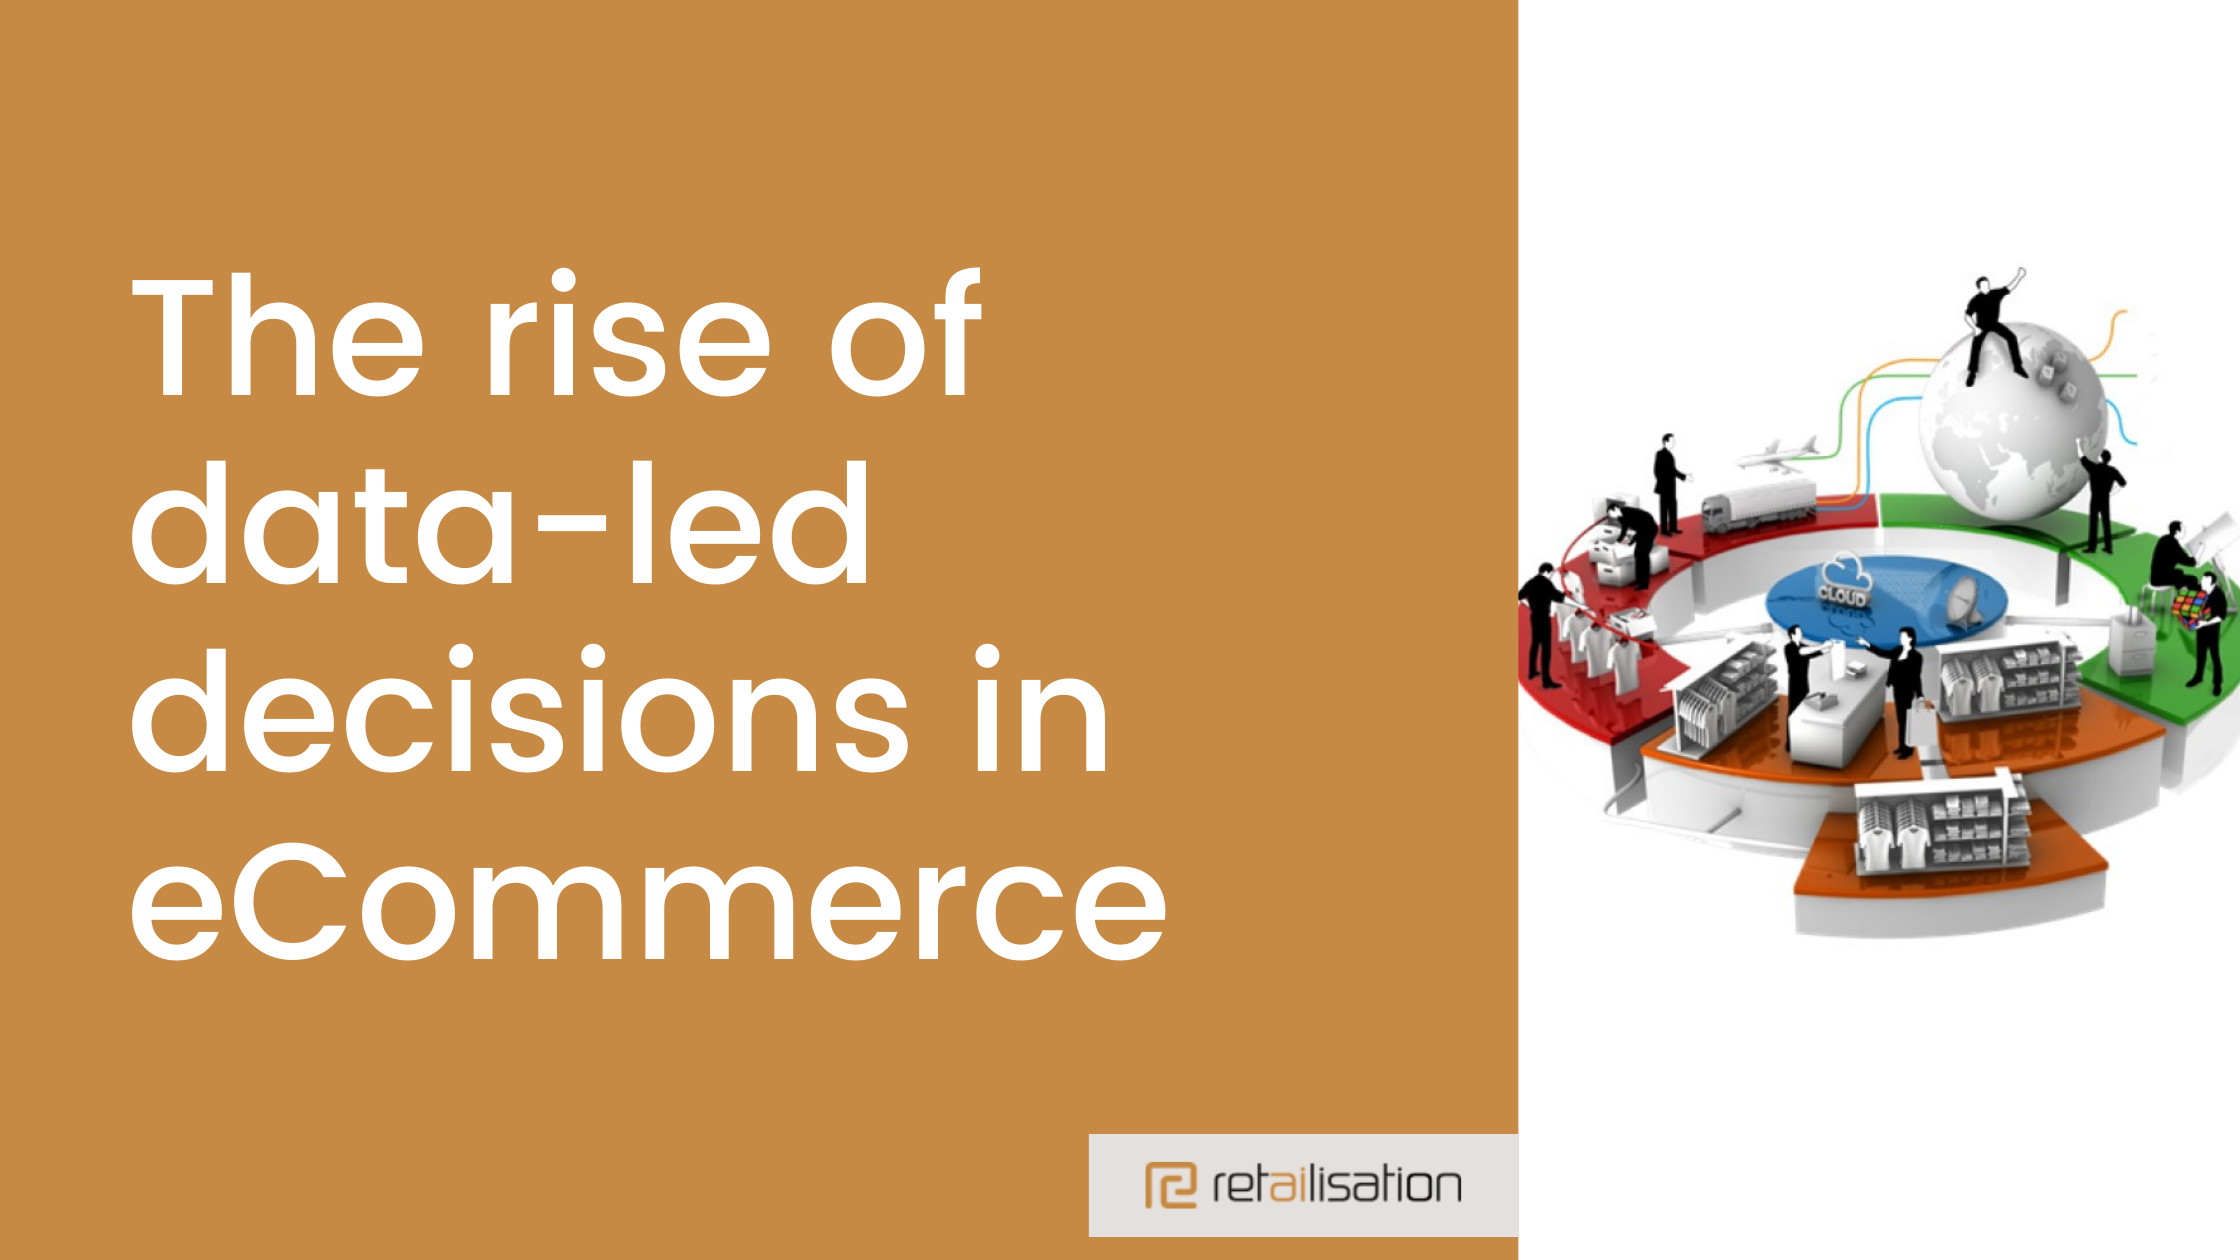 data-led decisions in ecommerce